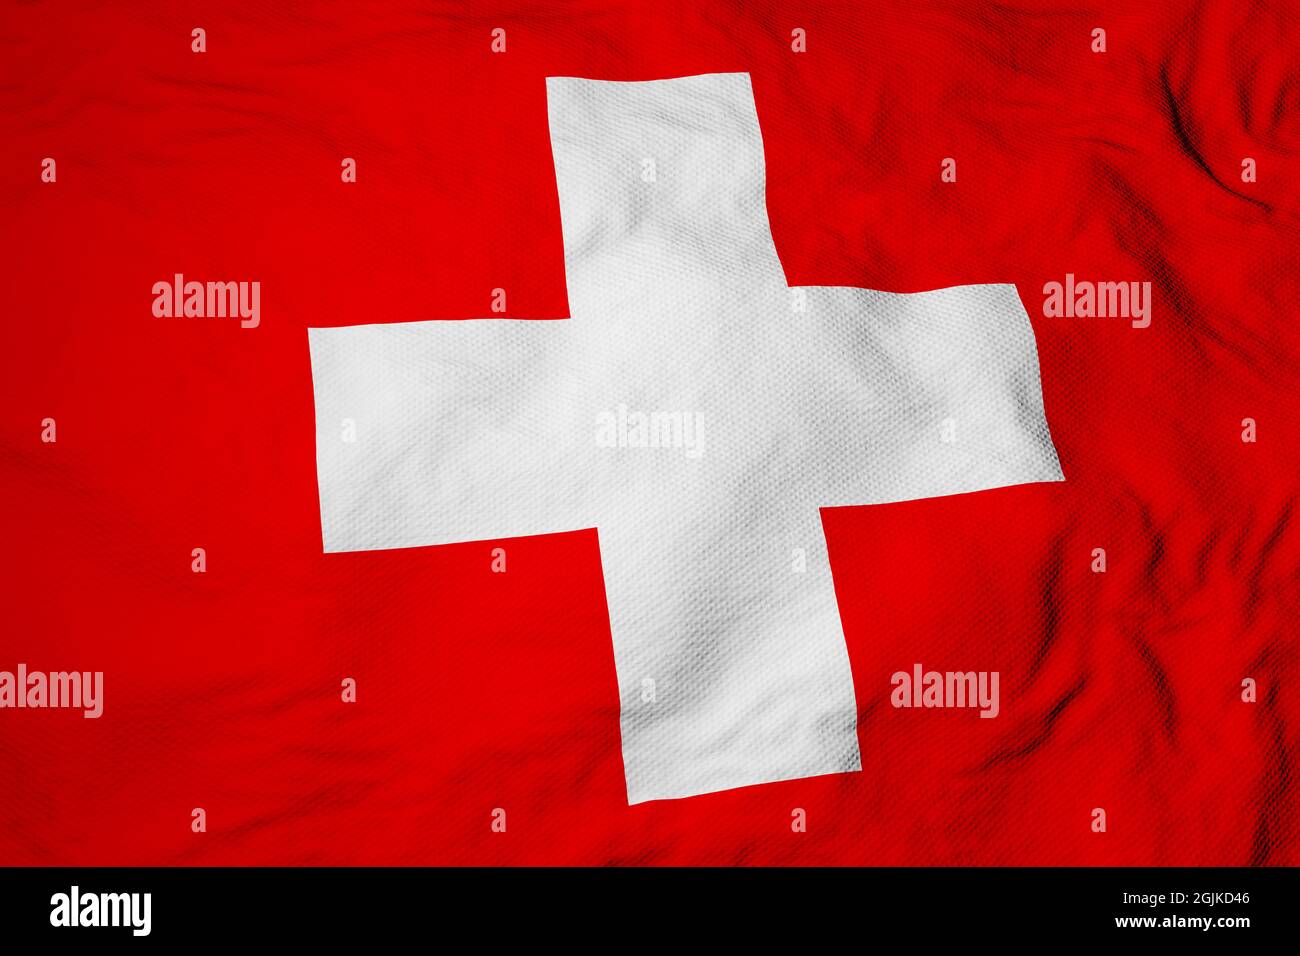 Full frame close-up on a waving Swiss flag in 3D rendering. Stock Photo